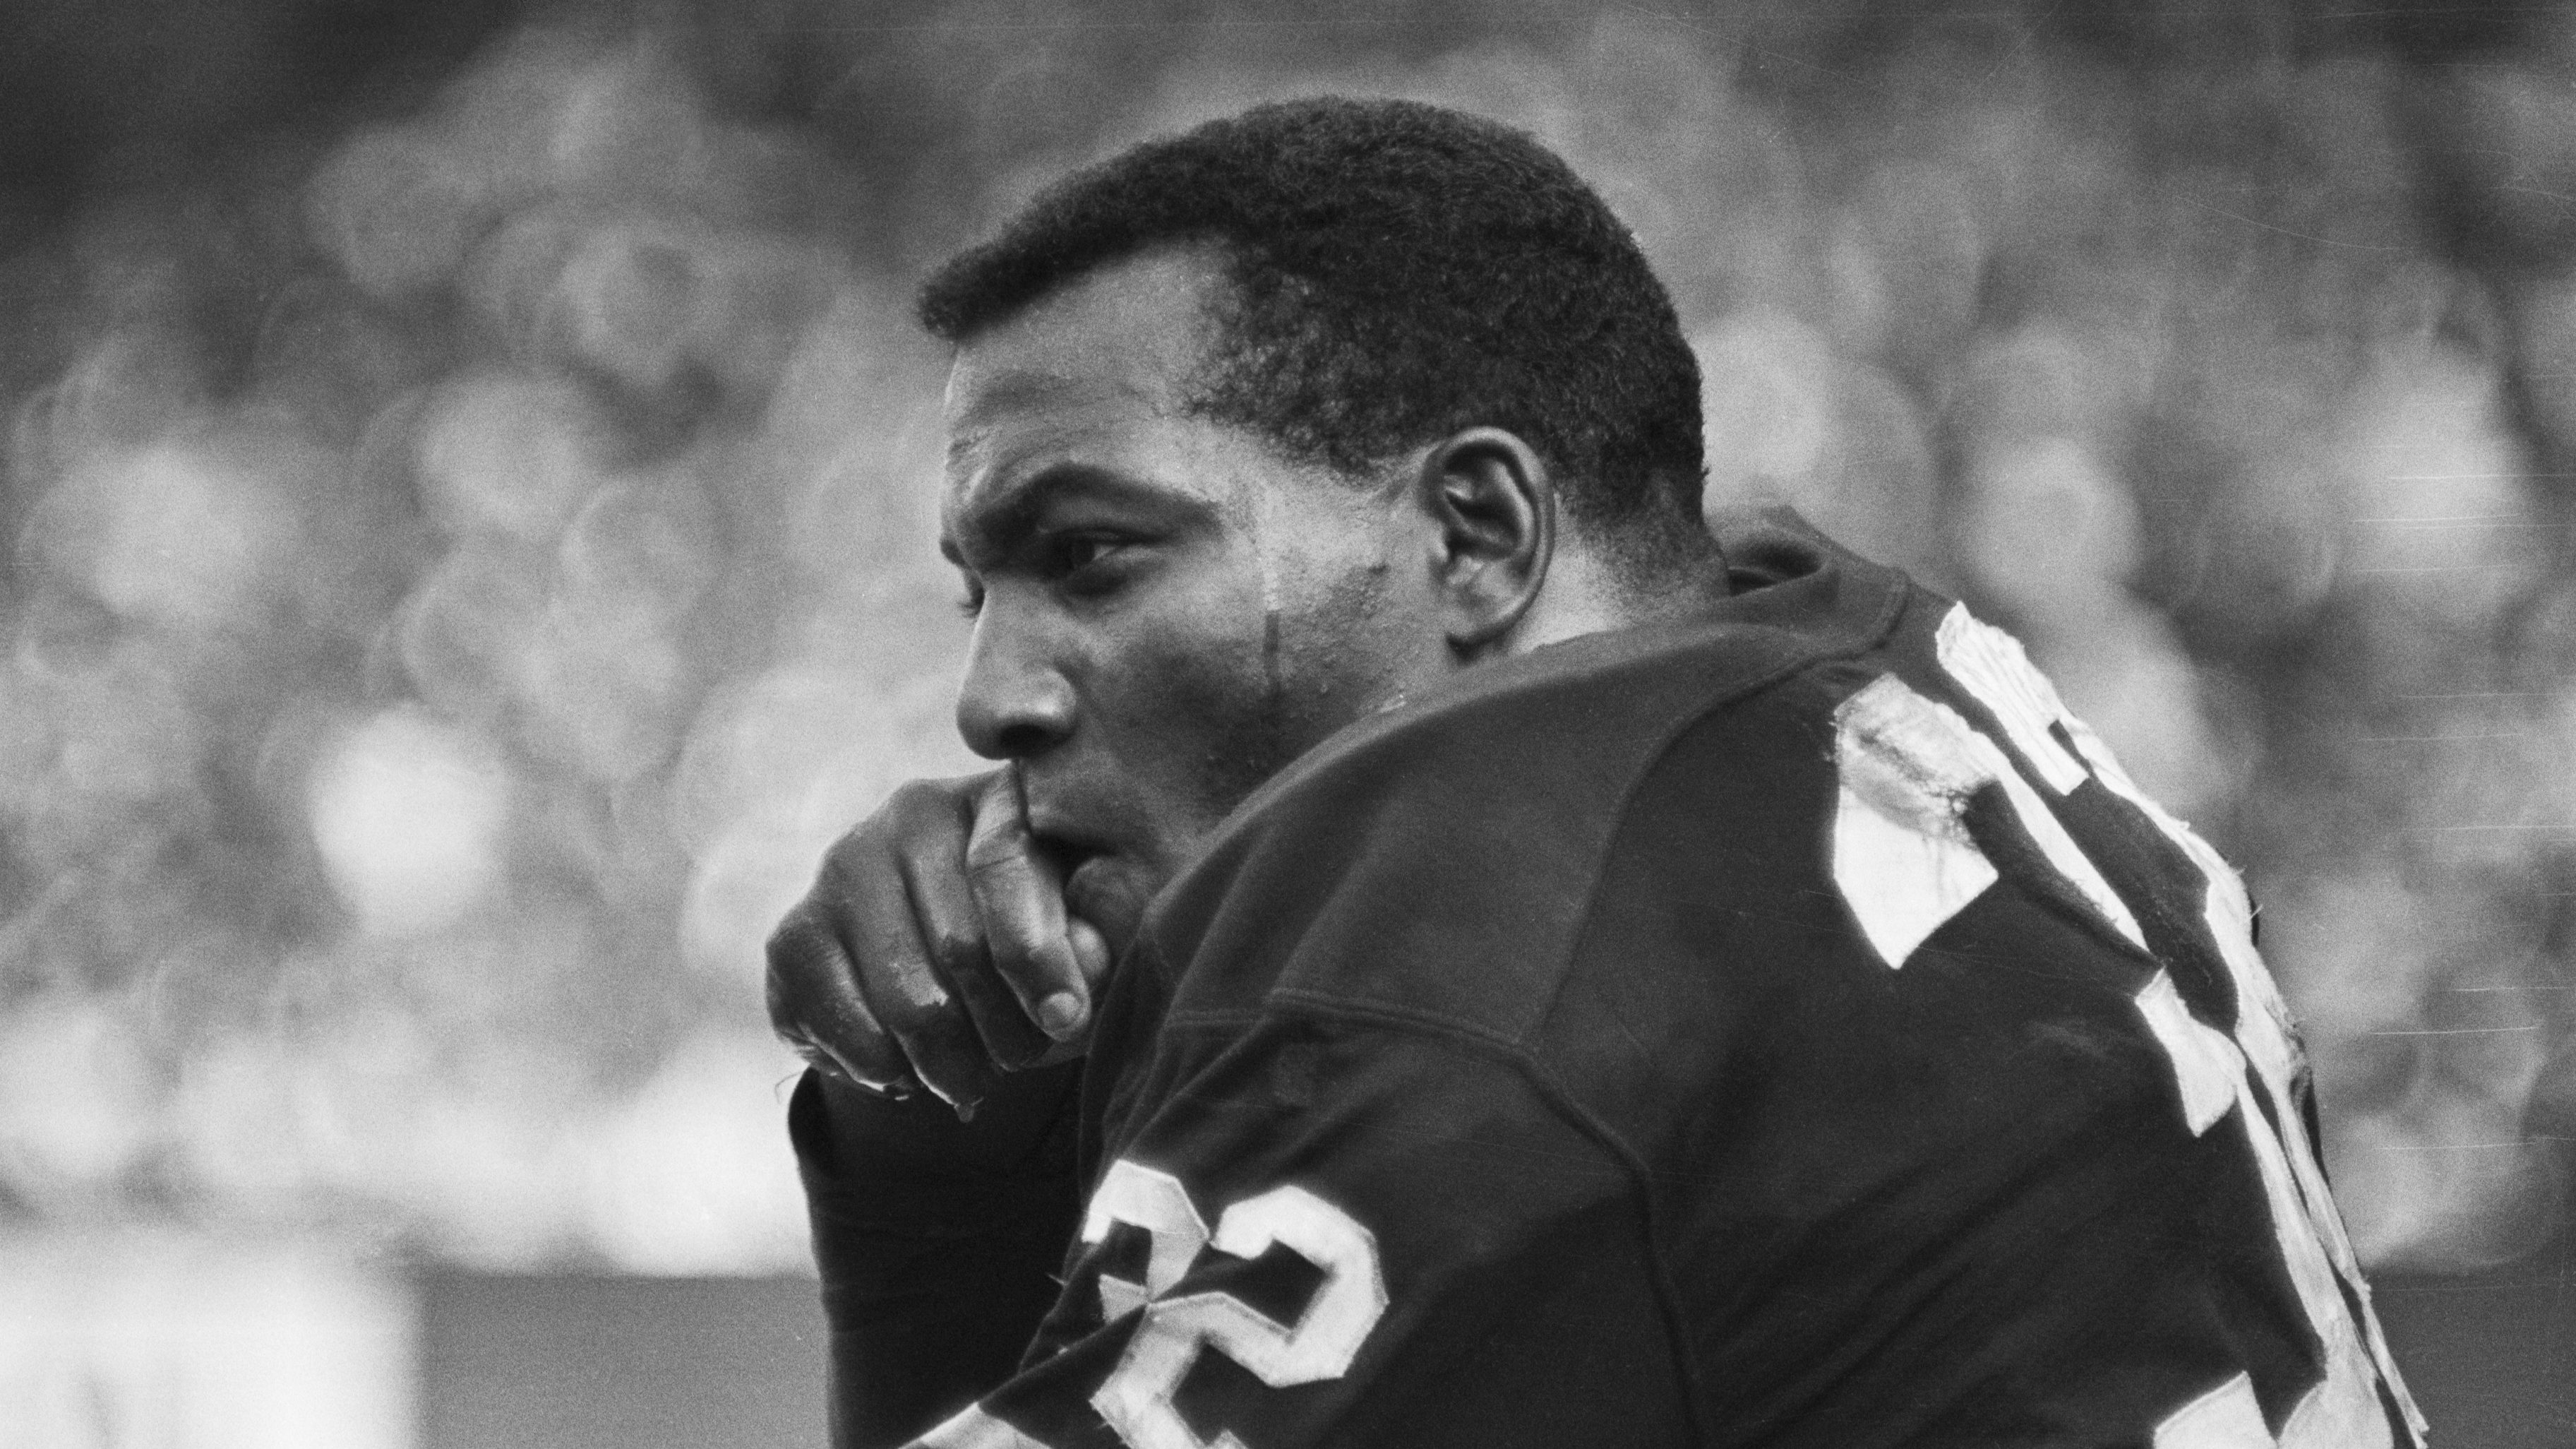 A black and white photo of a young Jim Brown, when he played for the Cleveland Browns. It shows Brown sitting on a bench, with fans off in the blurry distance.